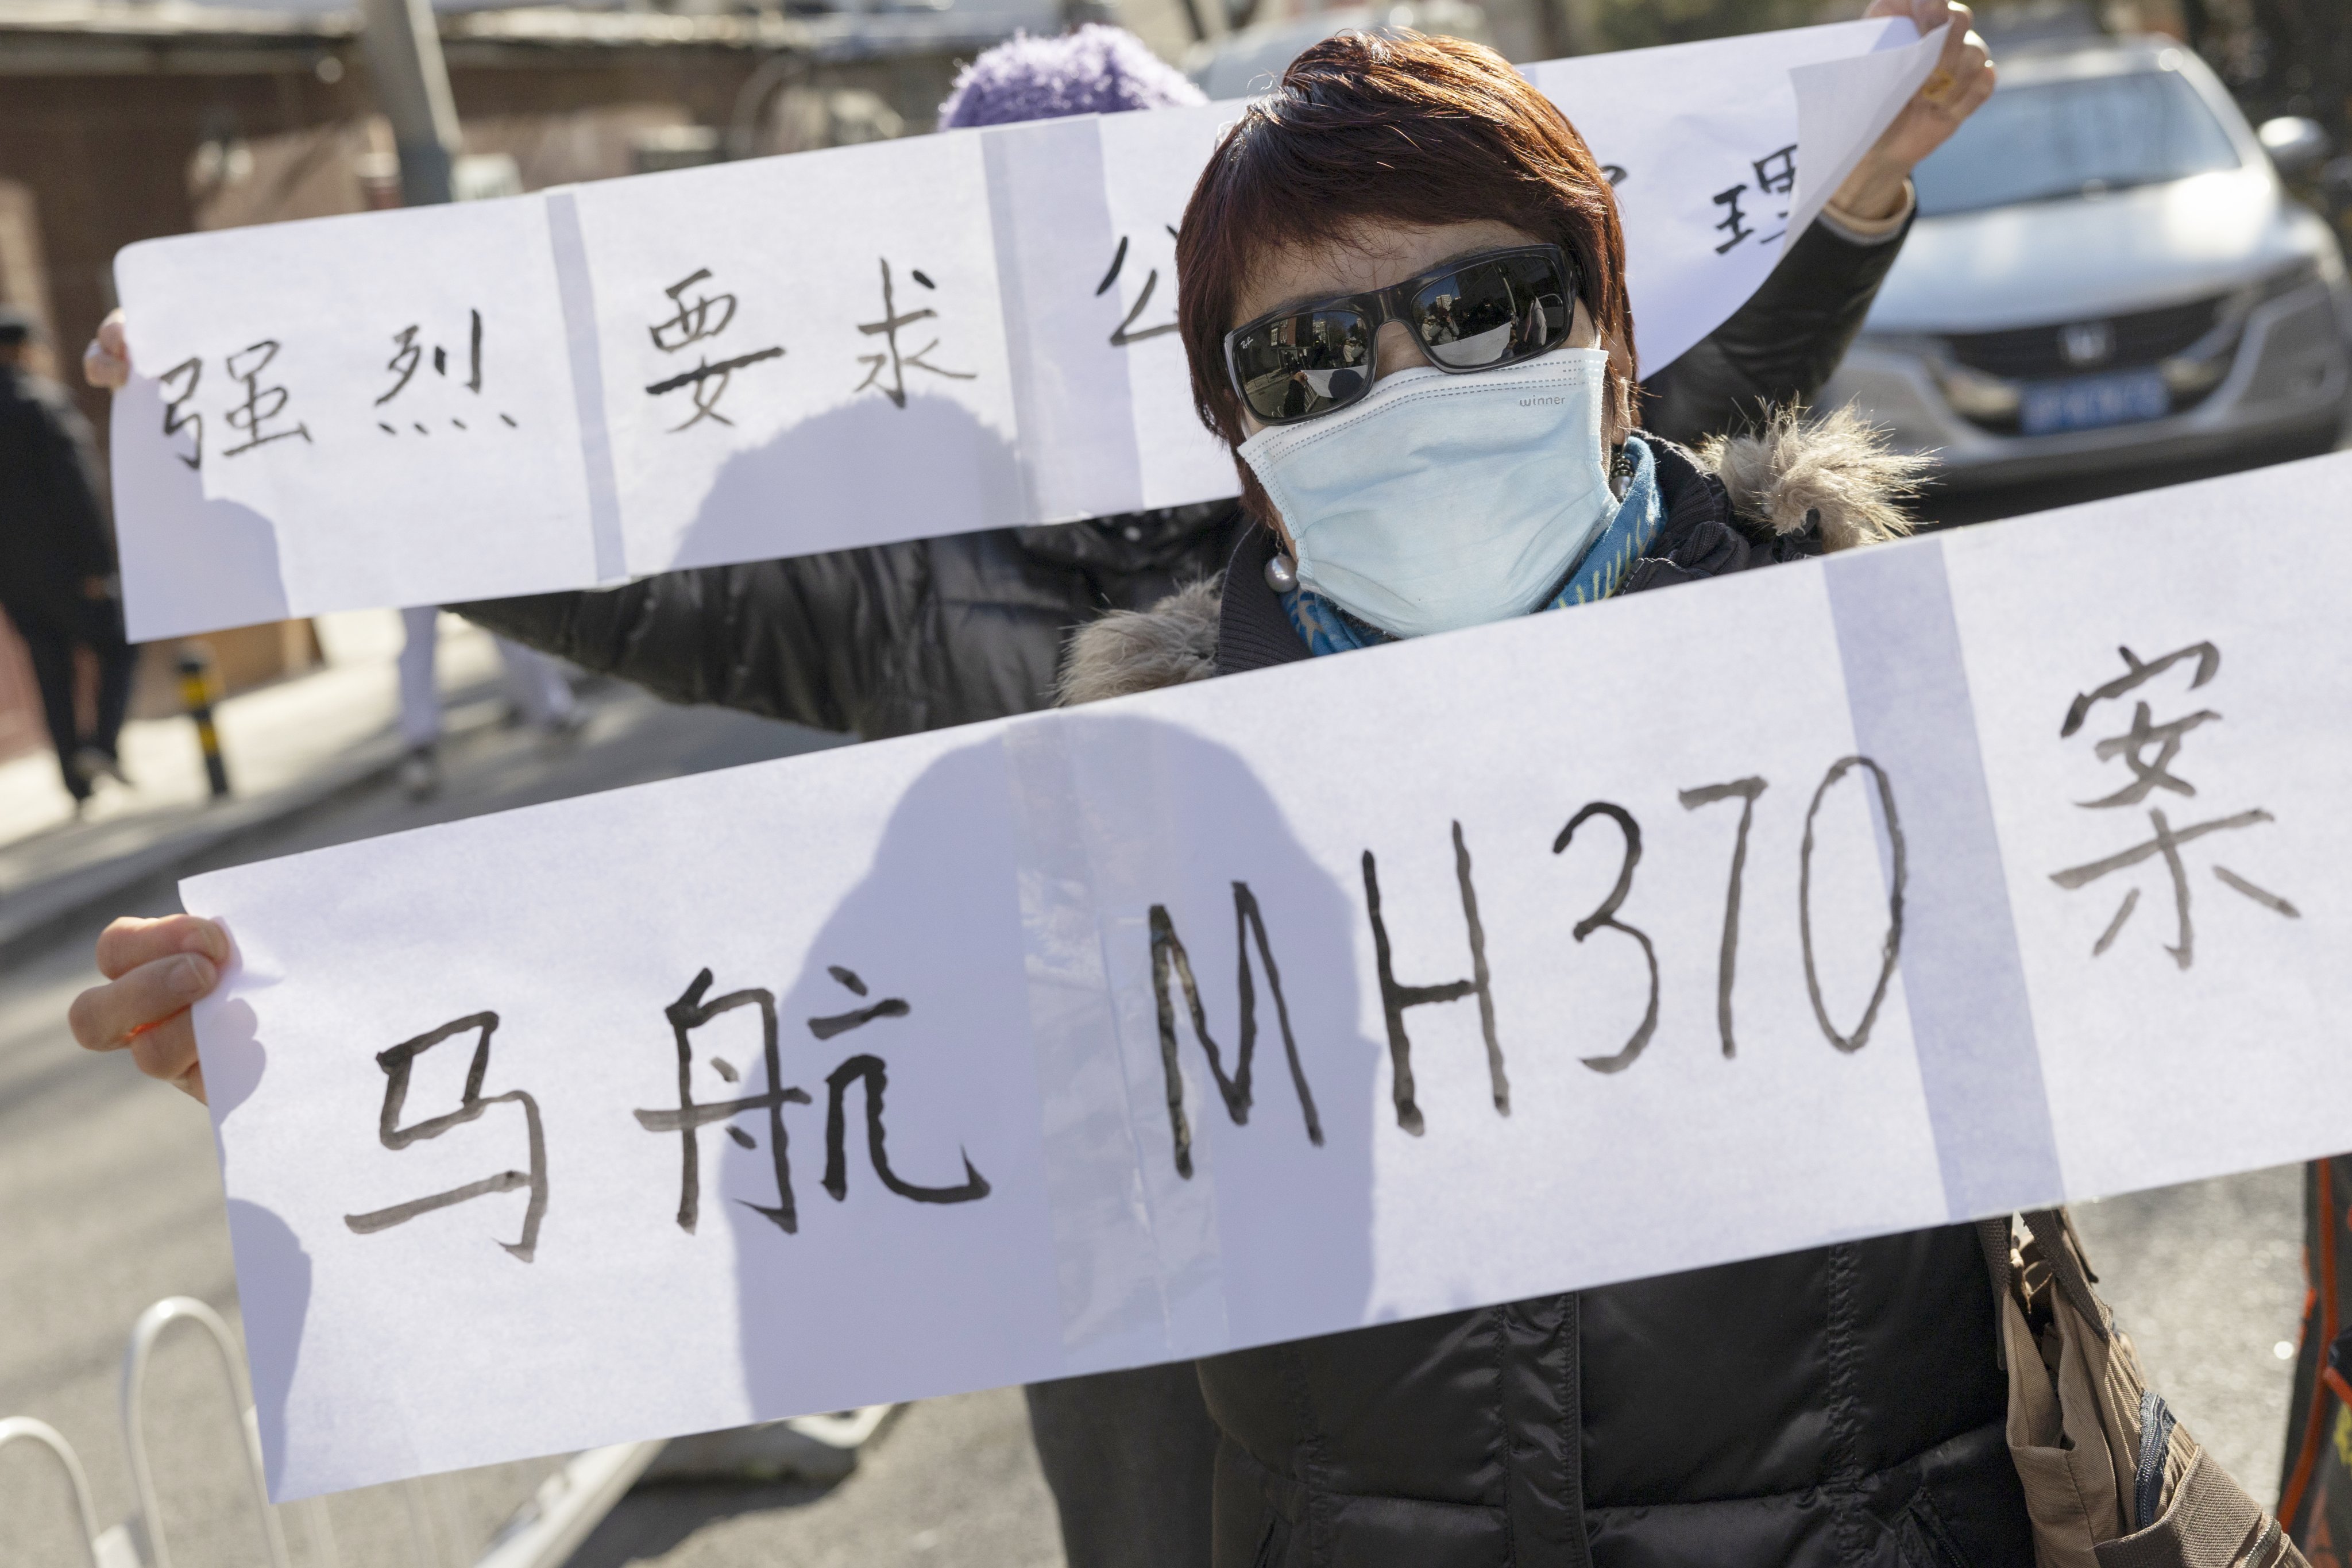 A relative of a missing flight MH370 passenger holds a banner stating “Malaysia Airlines MH370 case” in Chinese after a compensation claim hearing in Beijing on November 27. Photo: EPA-EFE